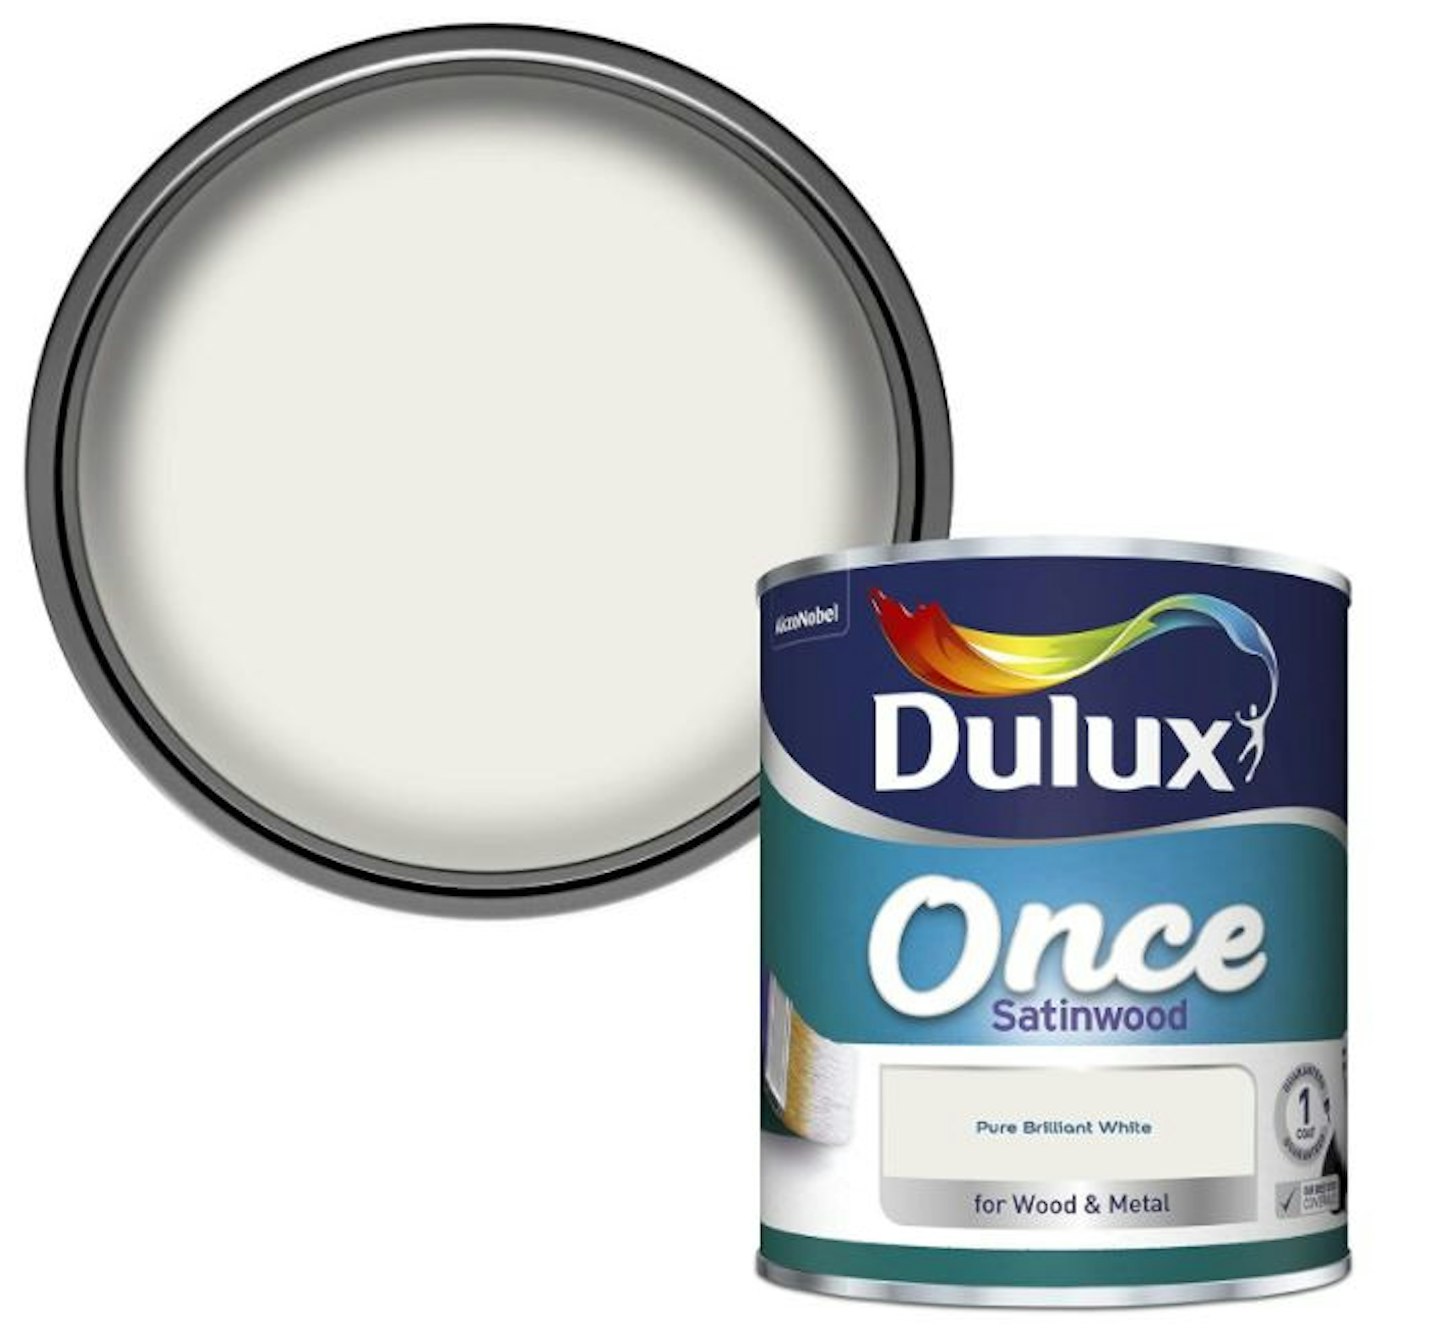 Dulux Once Satinwood Paint For Wood And Metal